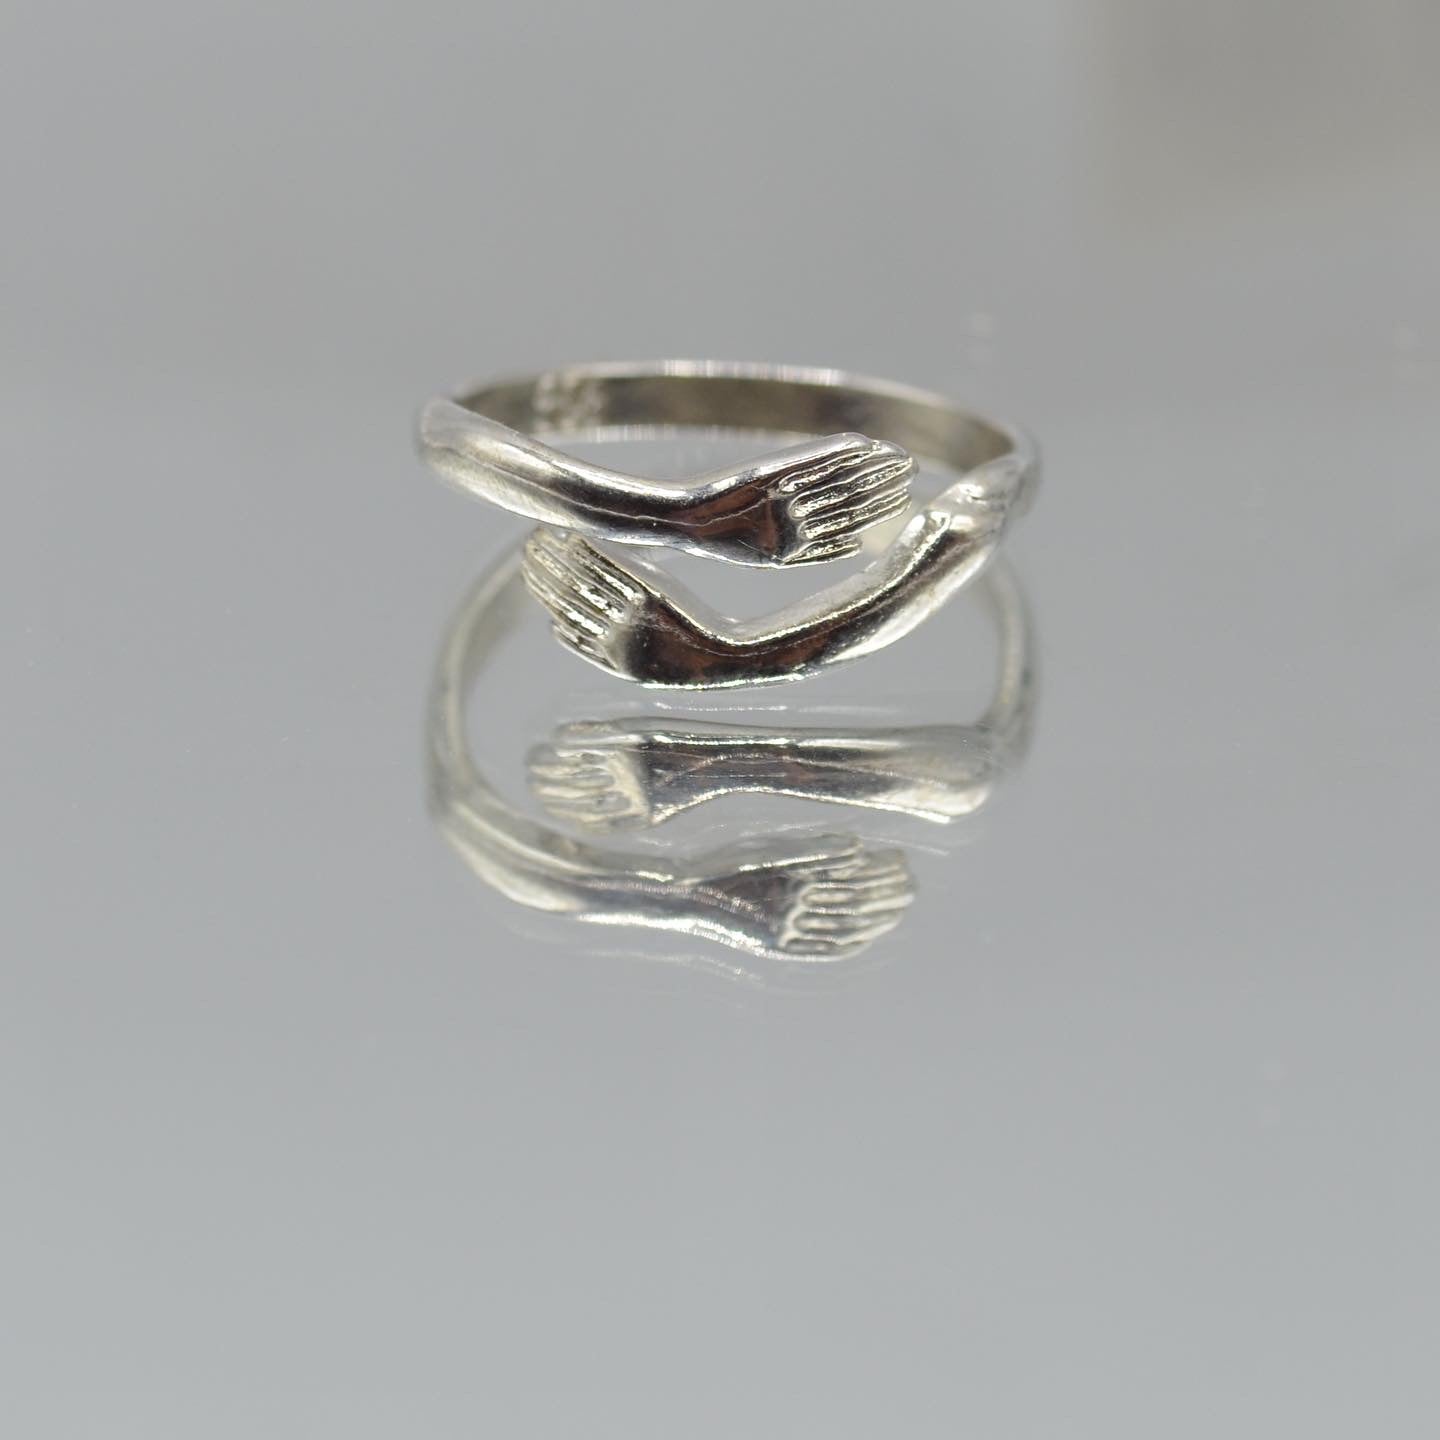 Handy Style Silver Ring